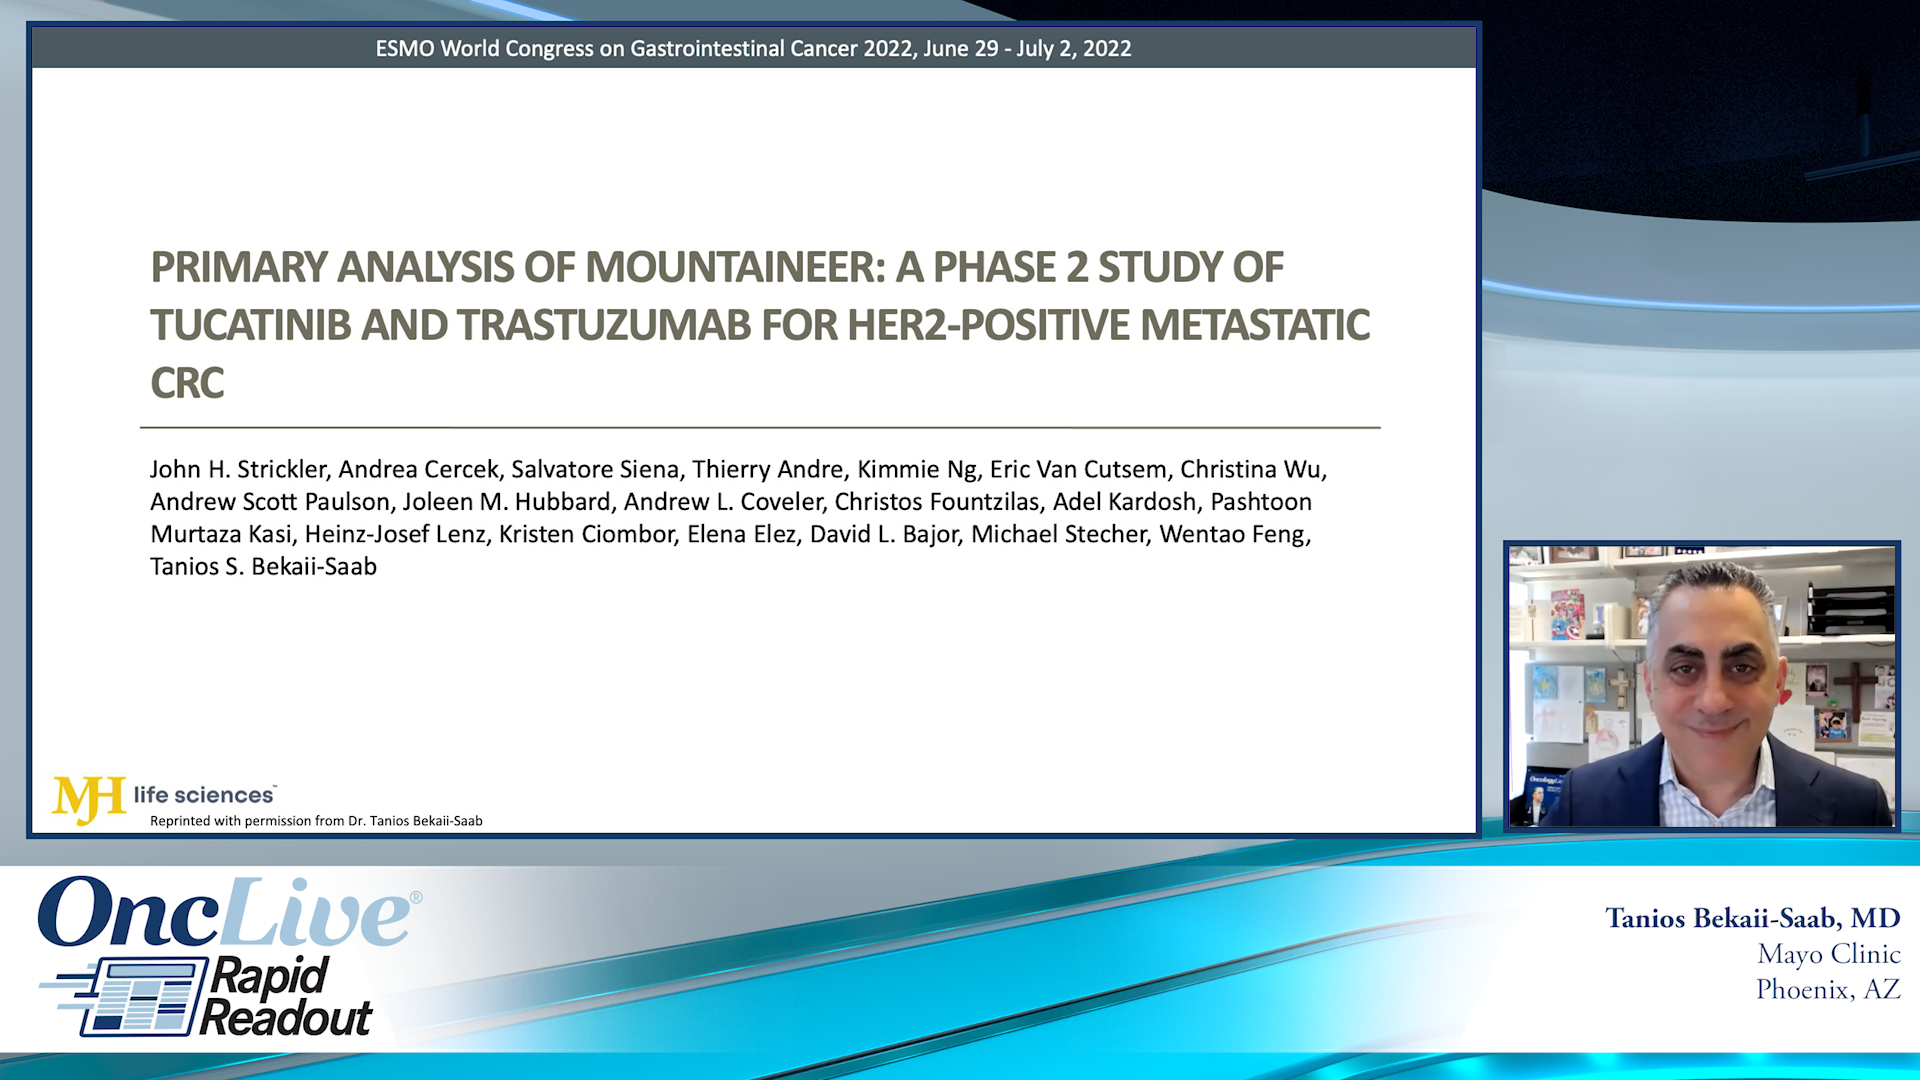 Primary Analysis of MOUNTAINEER: A Phase 2 Study of Tucatinib and Trastuzumab for HER2-positive mCRC